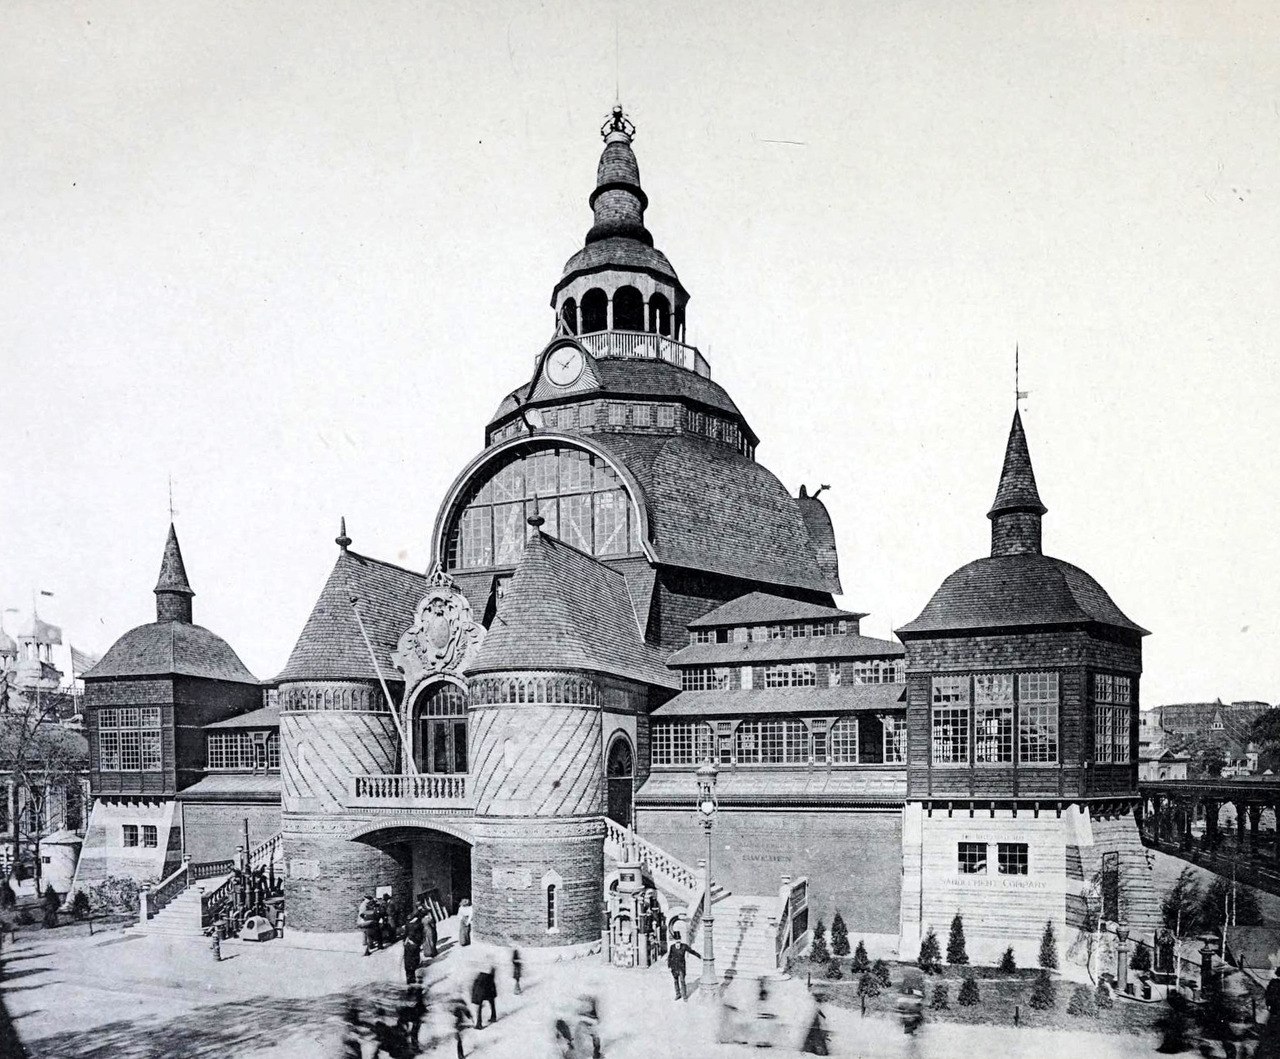 <p><span><span><span><span><span><span>The Swedish Pavilion was designed by Swedish architect Gustaf Clason for the 1893 World's Columbian Exposition in Chicago. This grand structure was built to showcase Sweden's cultural heritage, artistic achievements, and industrial prowess on the world stage.</span></span></span></span></span></span></p>  <p><span><span><span><span><span><span>The Swedish Pavilion blended different architectural styles, combining elements of traditional Swedish craftsmanship with modern influences. Its façade had intricate wood carvings and decorative motifs that reflected Sweden's artistic traditions. The building was constructed in Sweden and then shipped to Chicago piece by piece. The building cost $40,000 to erect. During the World's Columbian Exposition, the Swedish Pavilion promoted Swedish culture, industry, and trade. It offered exhibitions of Swedish art, handicrafts, and innovations.</span></span></span></span></span></span></p>